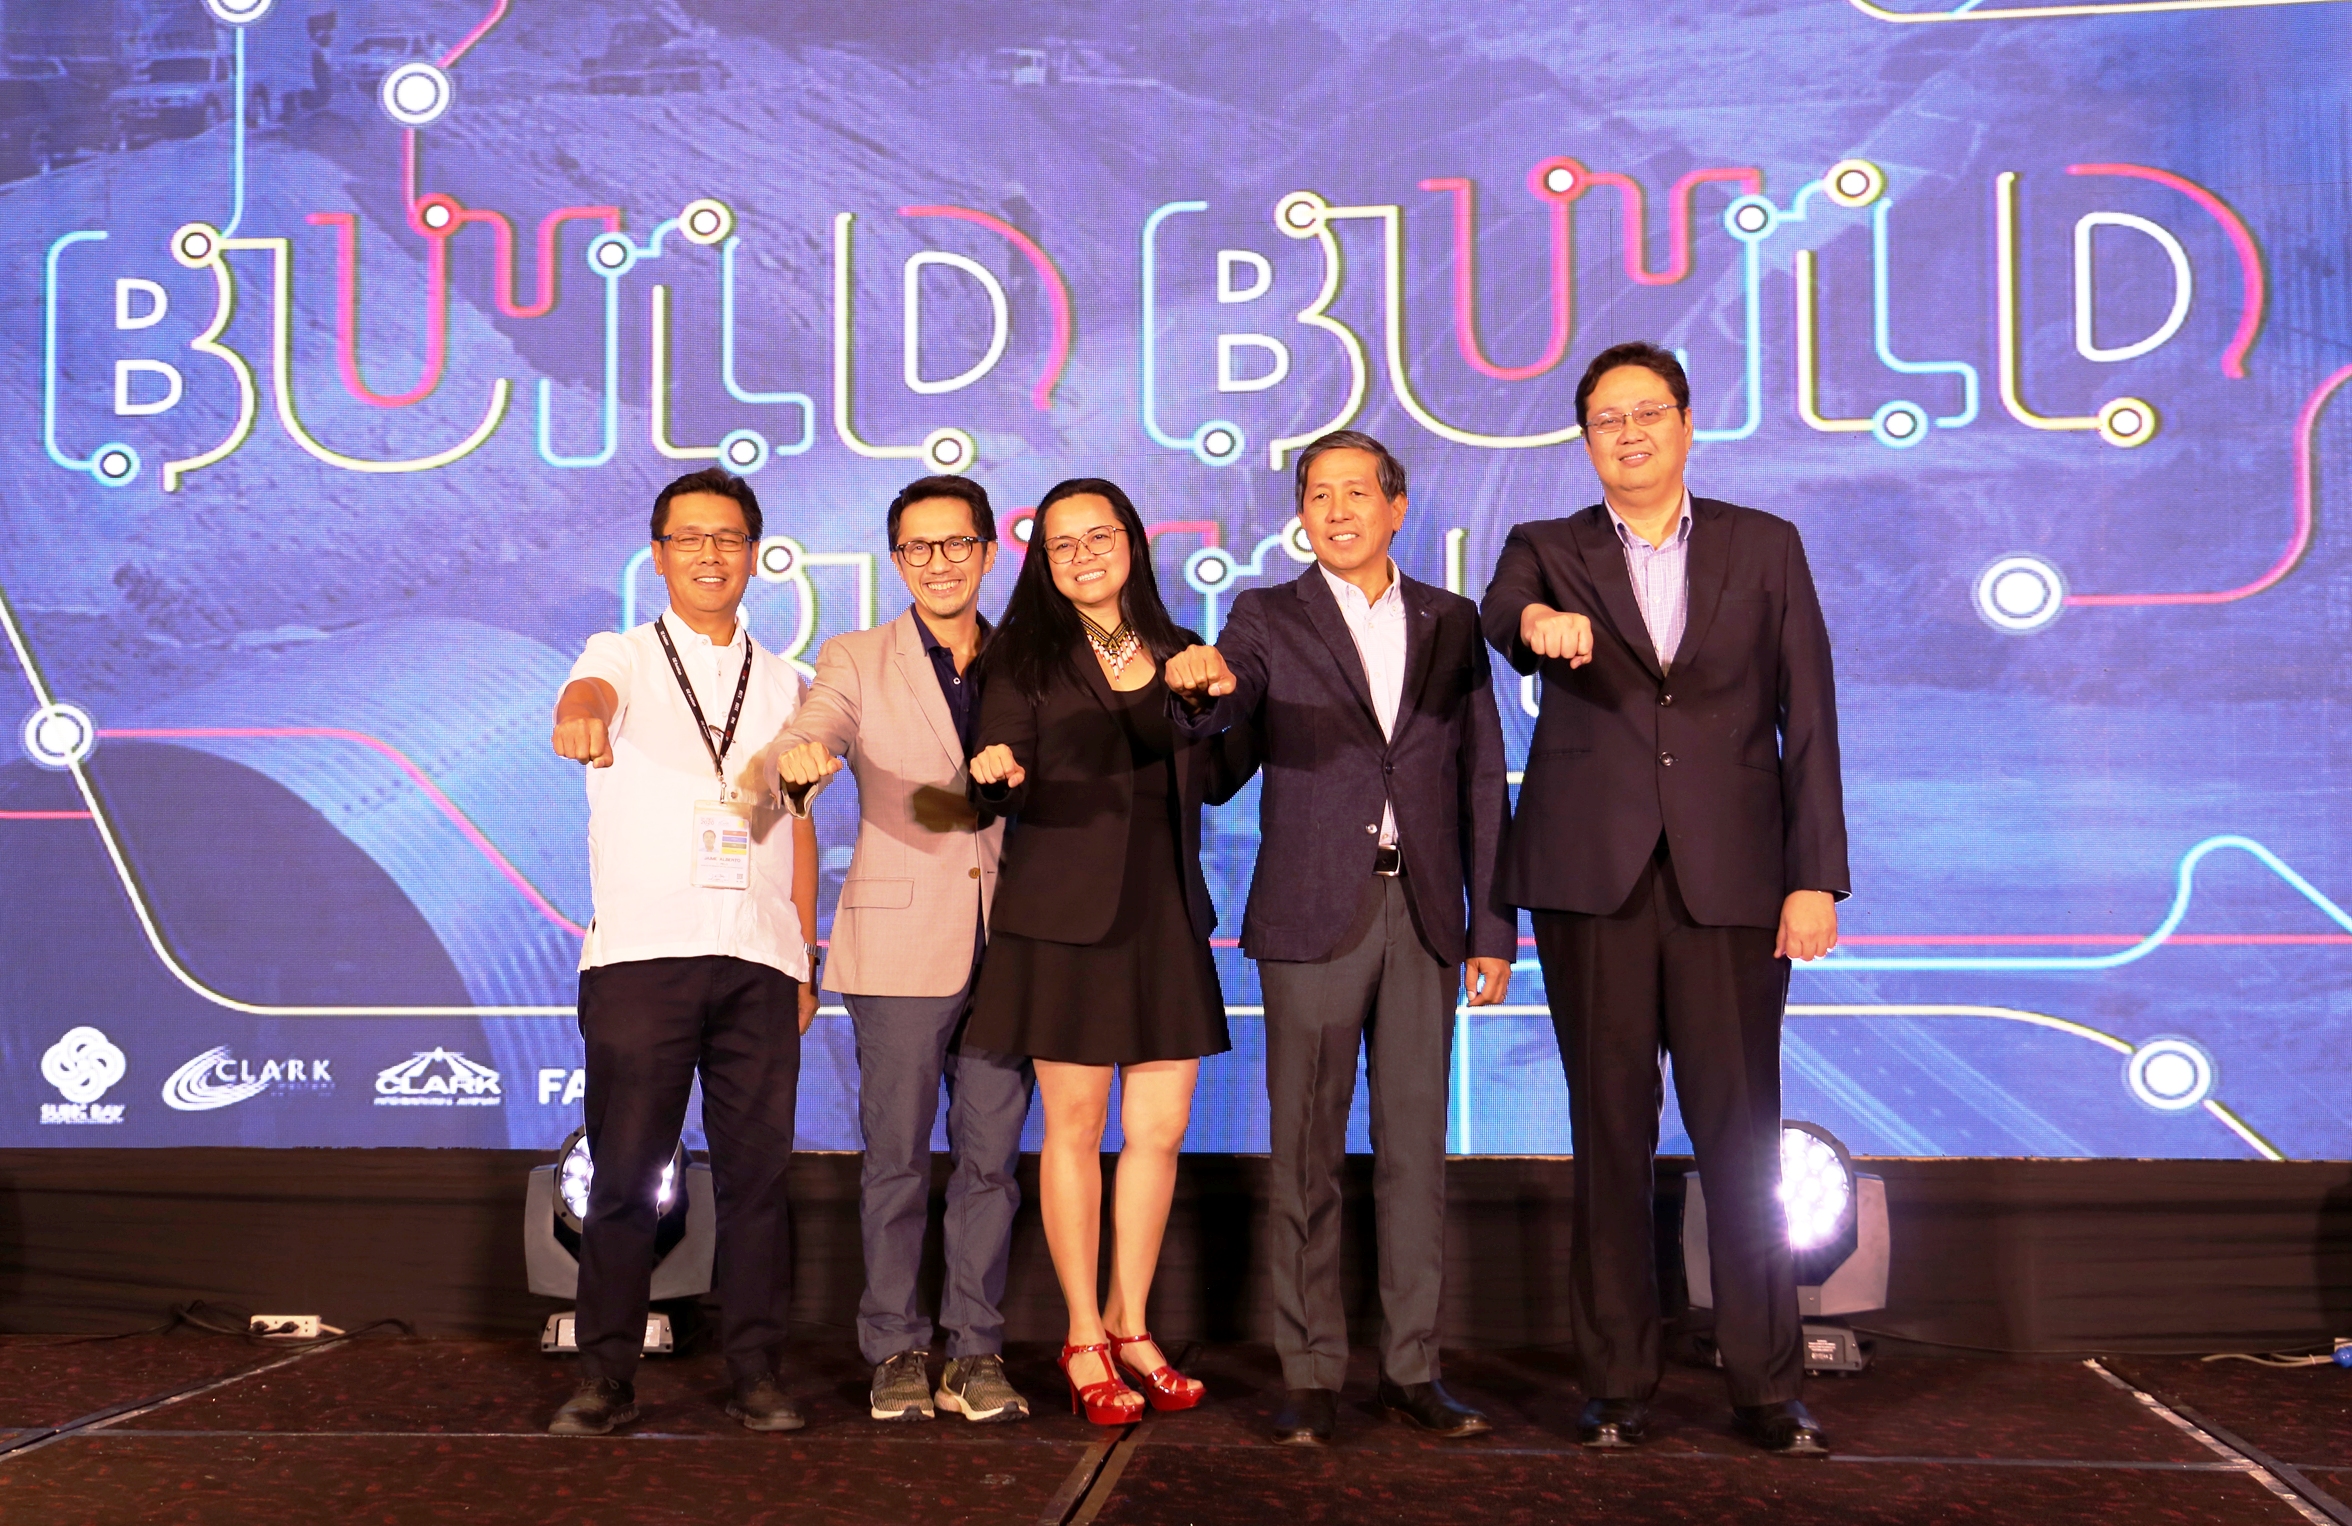 Heads of government agencies pledge to work together for Central Luzon development. From left: CIAC Acting President and CEO Jaime Alberto Melo, BCDA President and CEO Vivencio Dizon, SBMA Chairman and Administrator Wilma T. Eisma, AFAB Chairman and Administrator Emmanuel Pineda, and CDC President and CEO Noel Manankil.